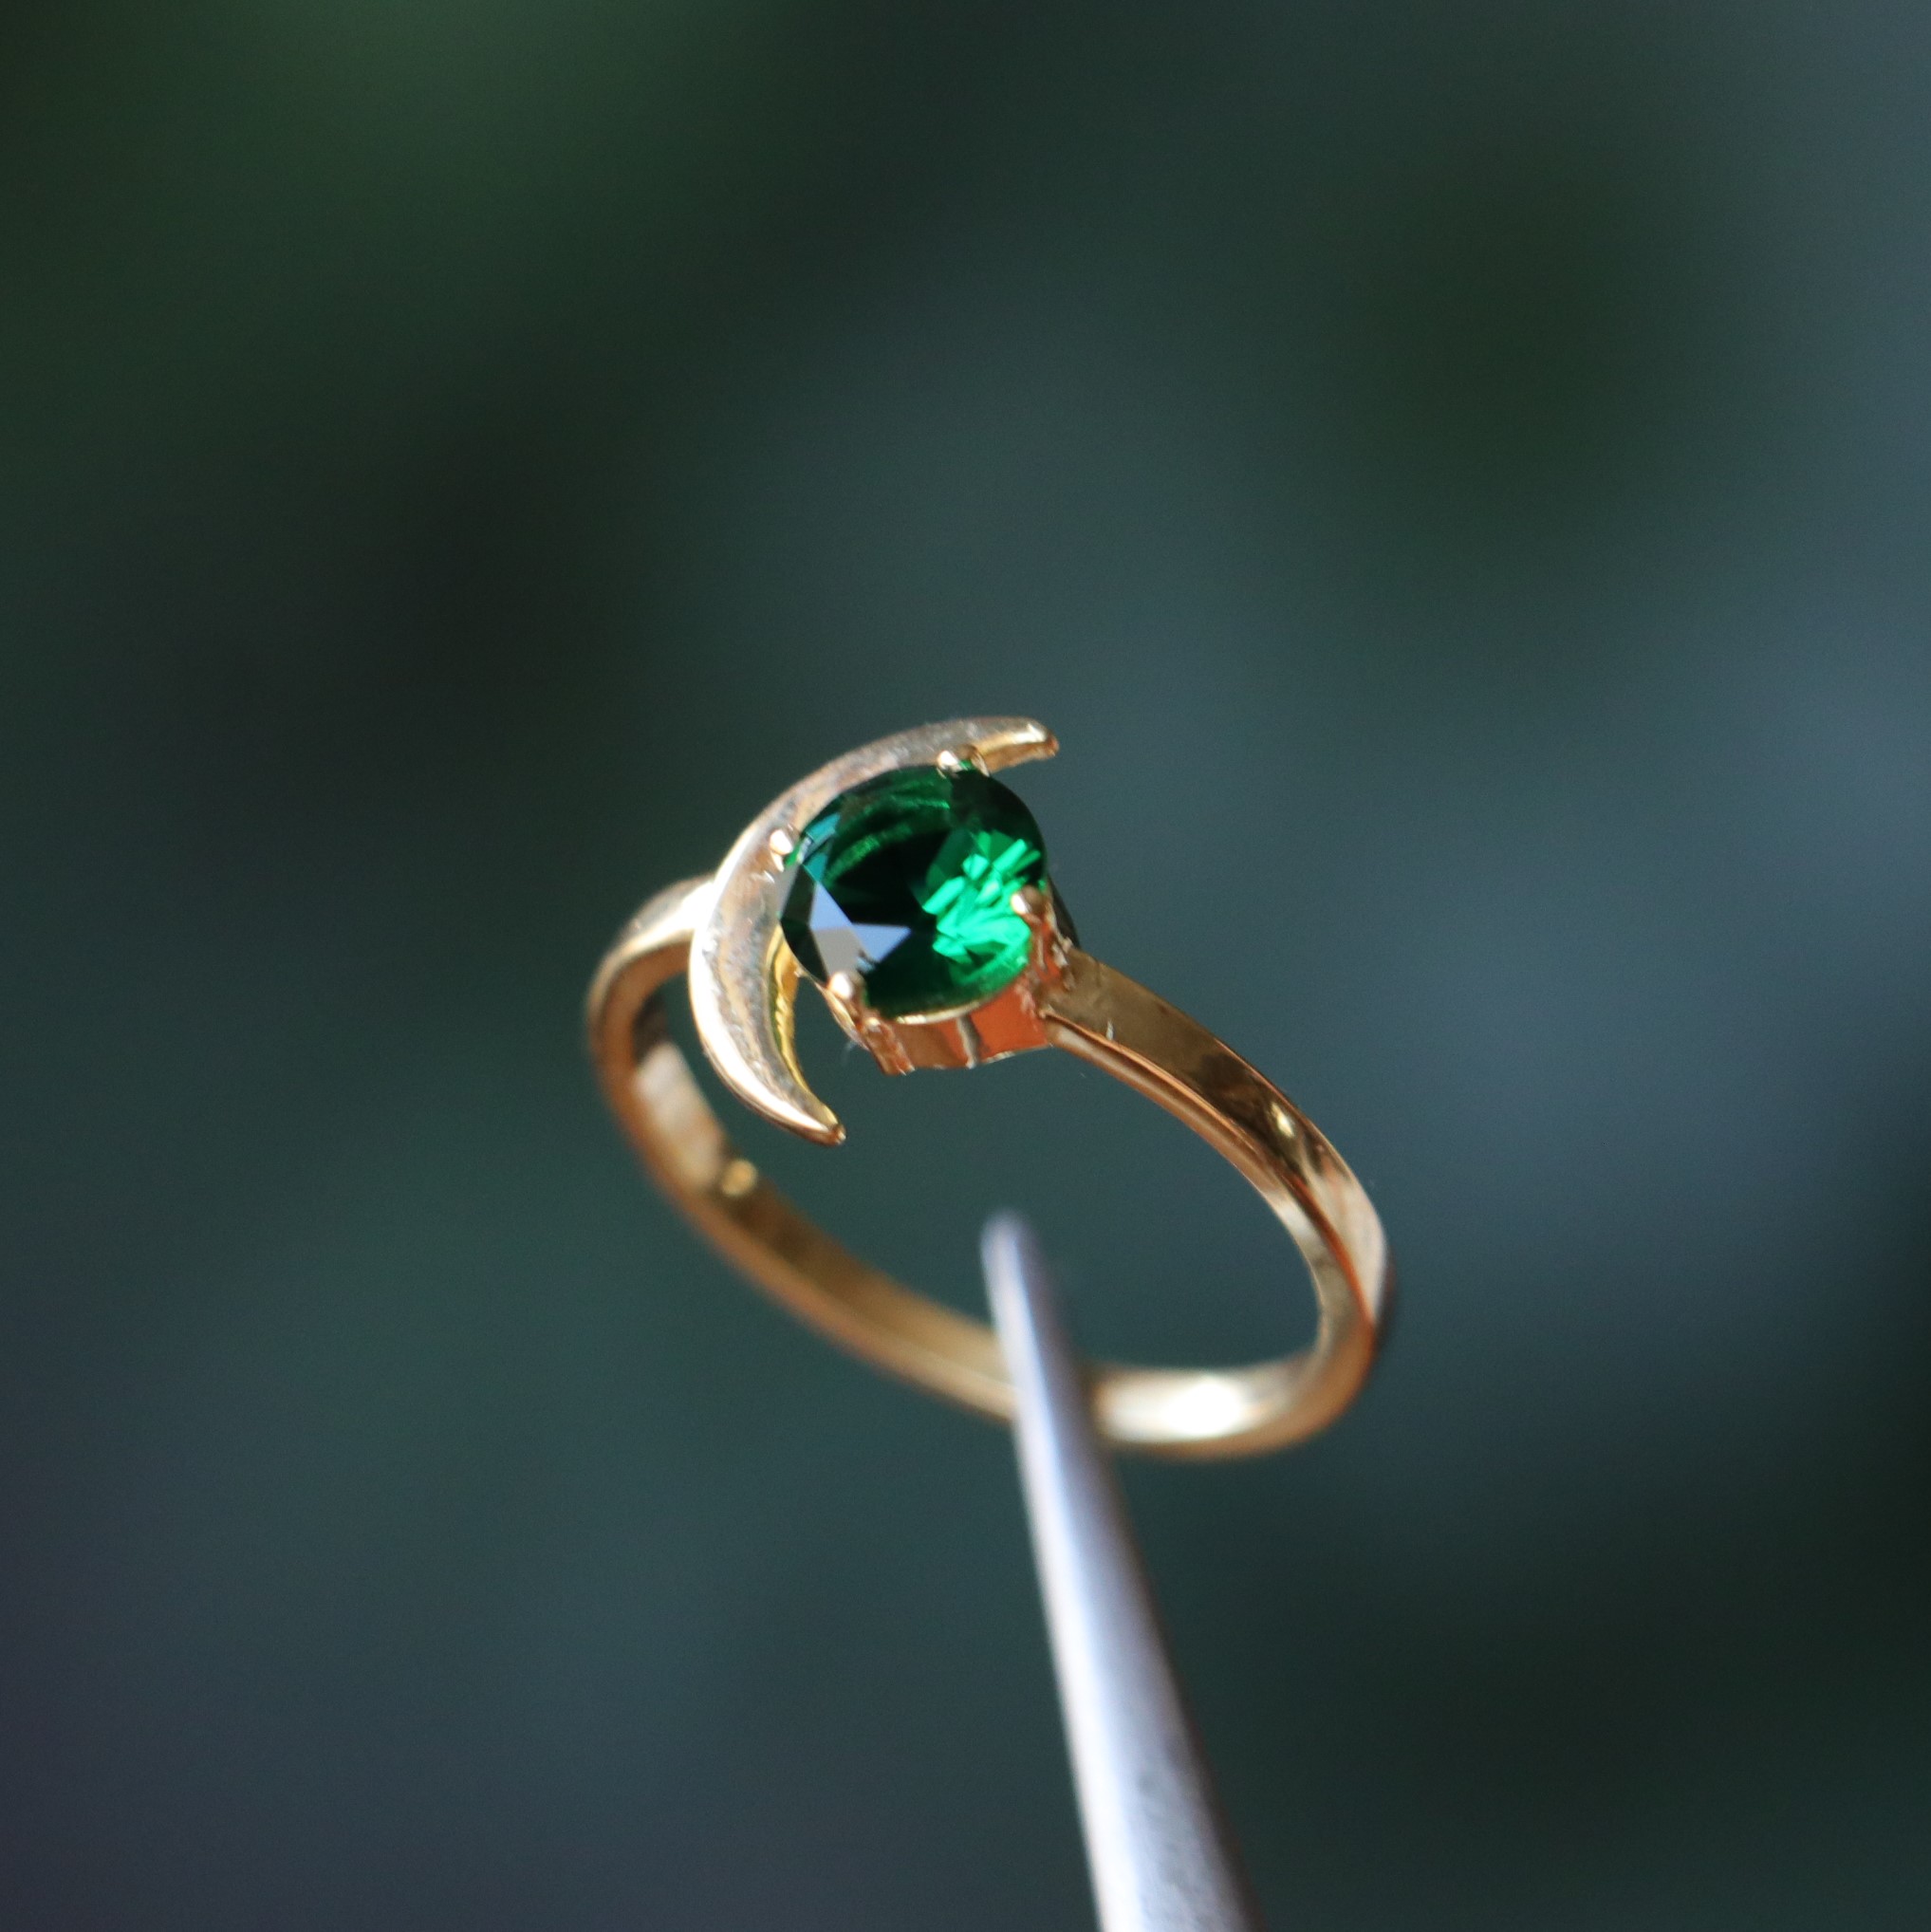 Crescent Moon Lab. Emerald 925 Sterling Silver Gold Plated Ring